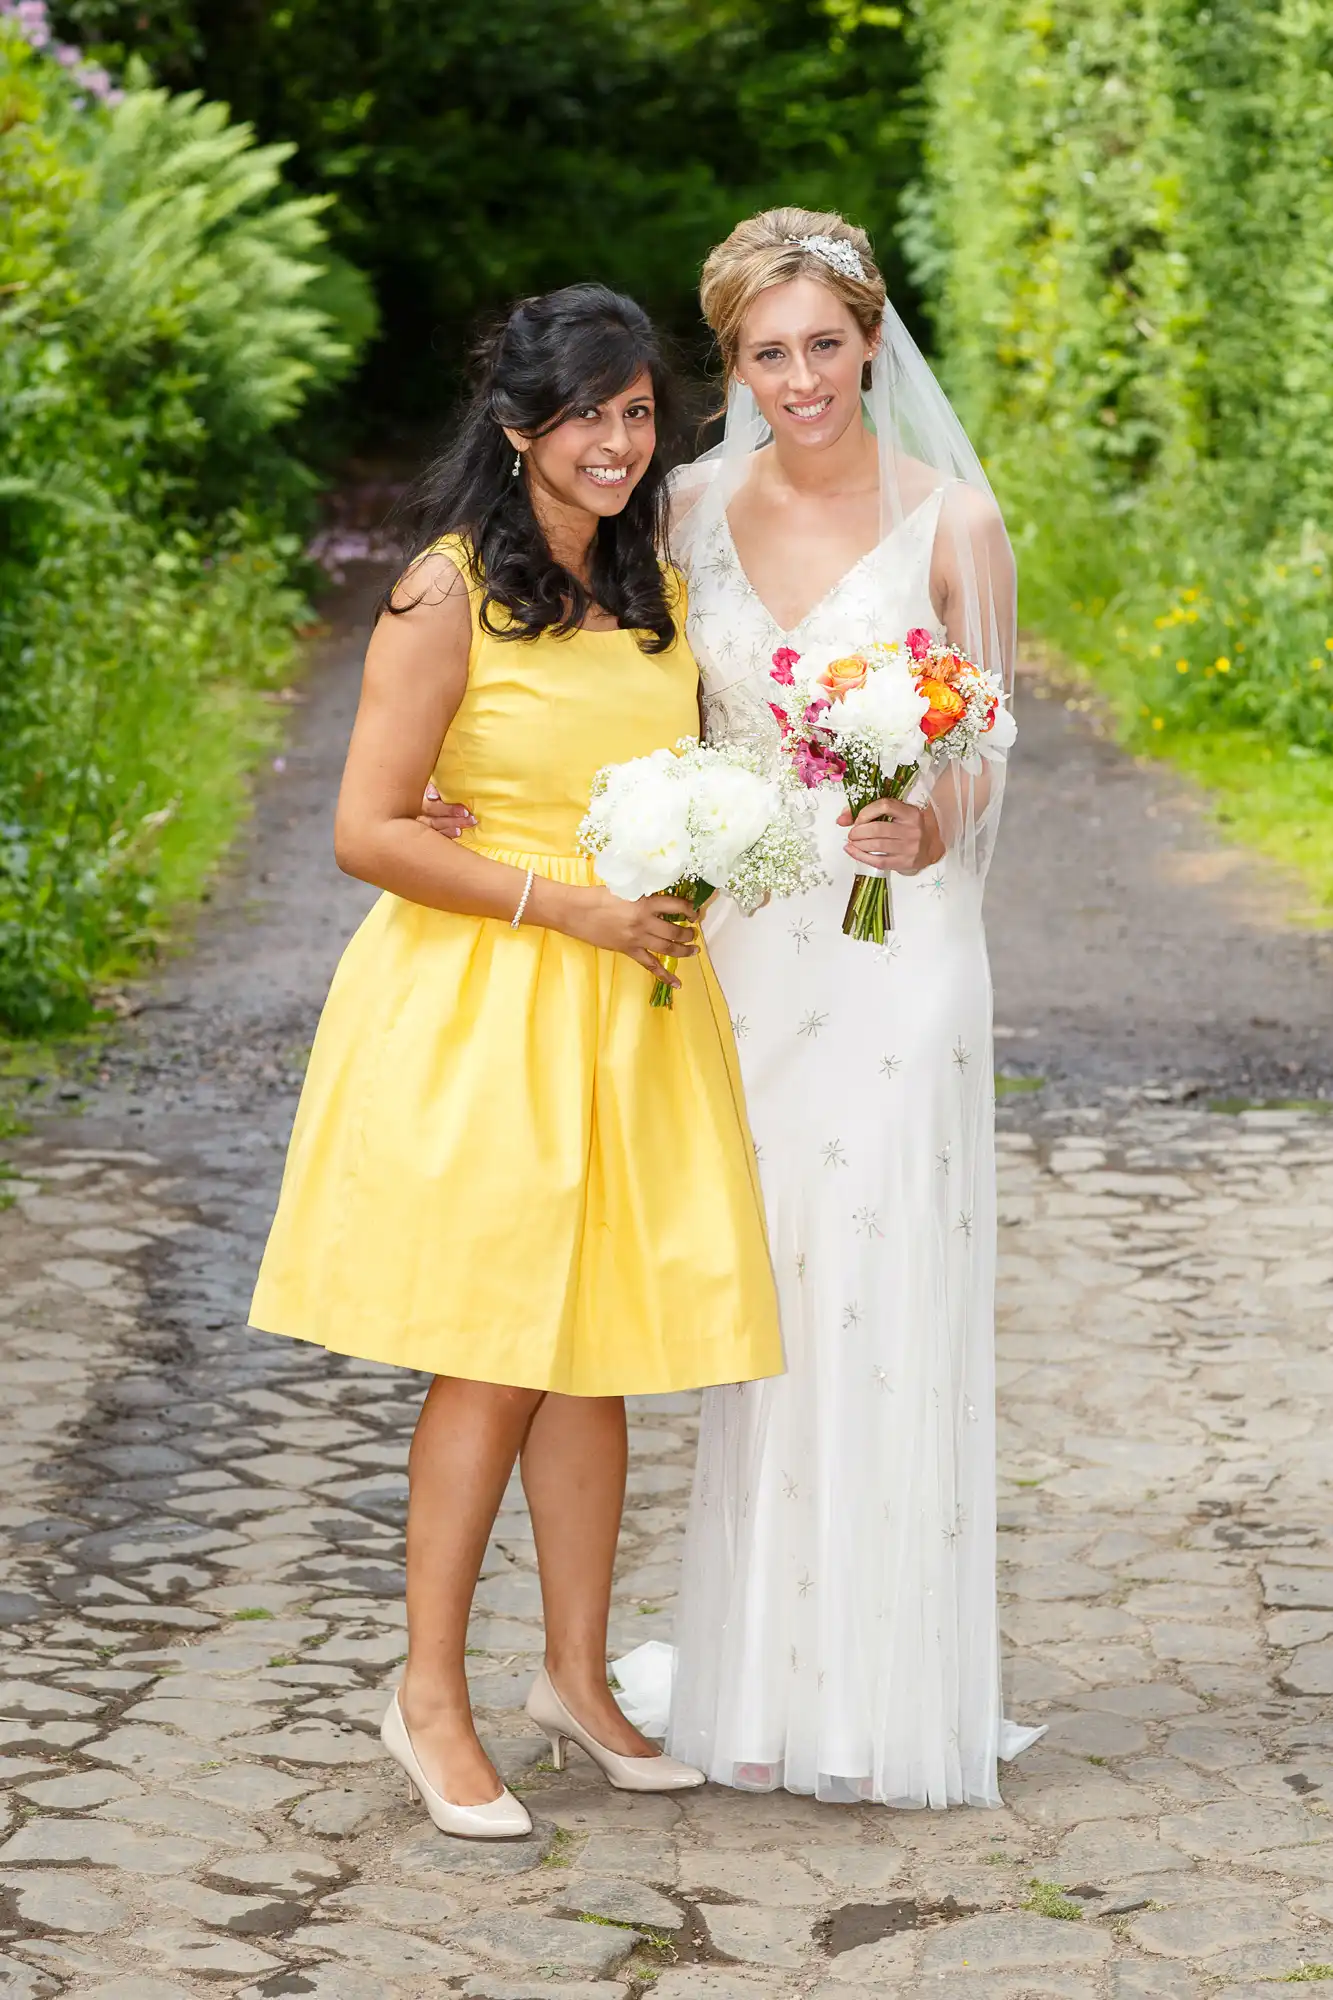 Two women, one in a yellow dress and the other in a white bridal gown, smiling and holding bouquets on a garden path.